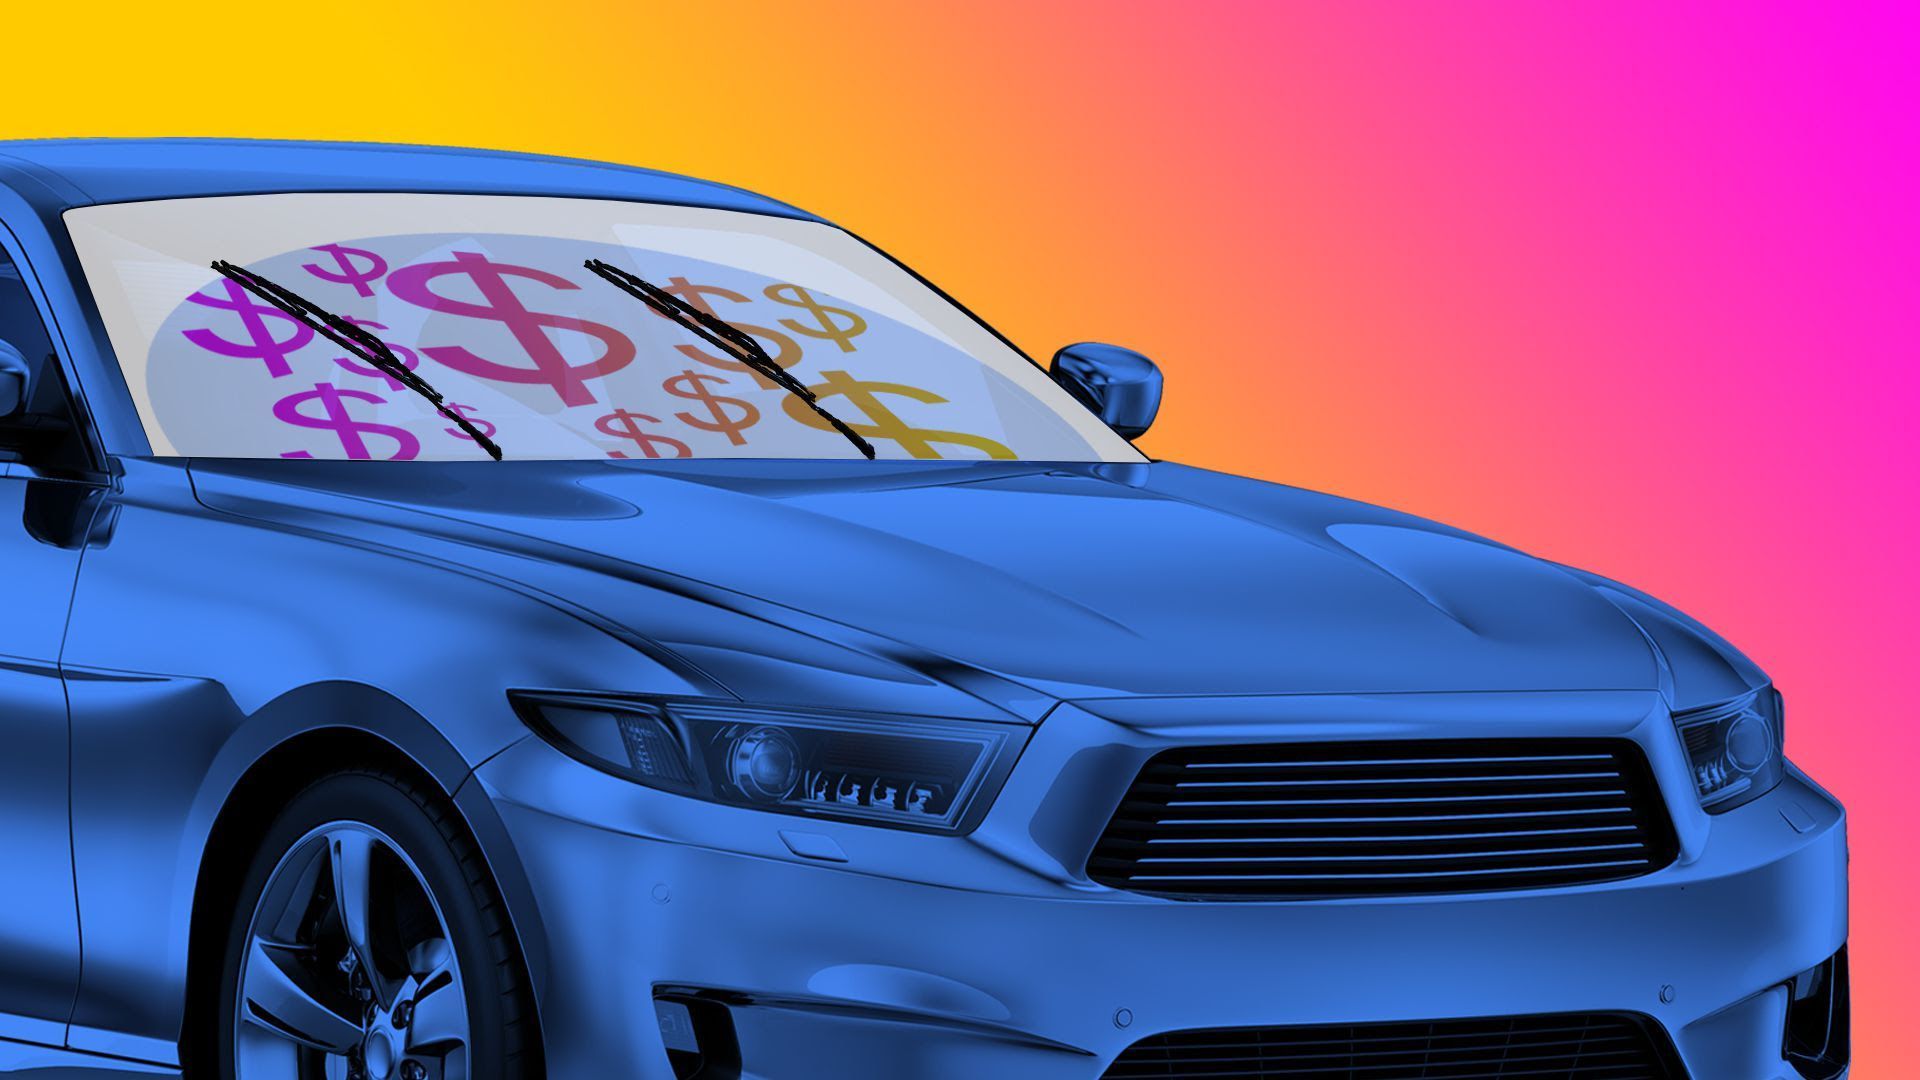 Illustration of a car with money symbols fogging up the windshield